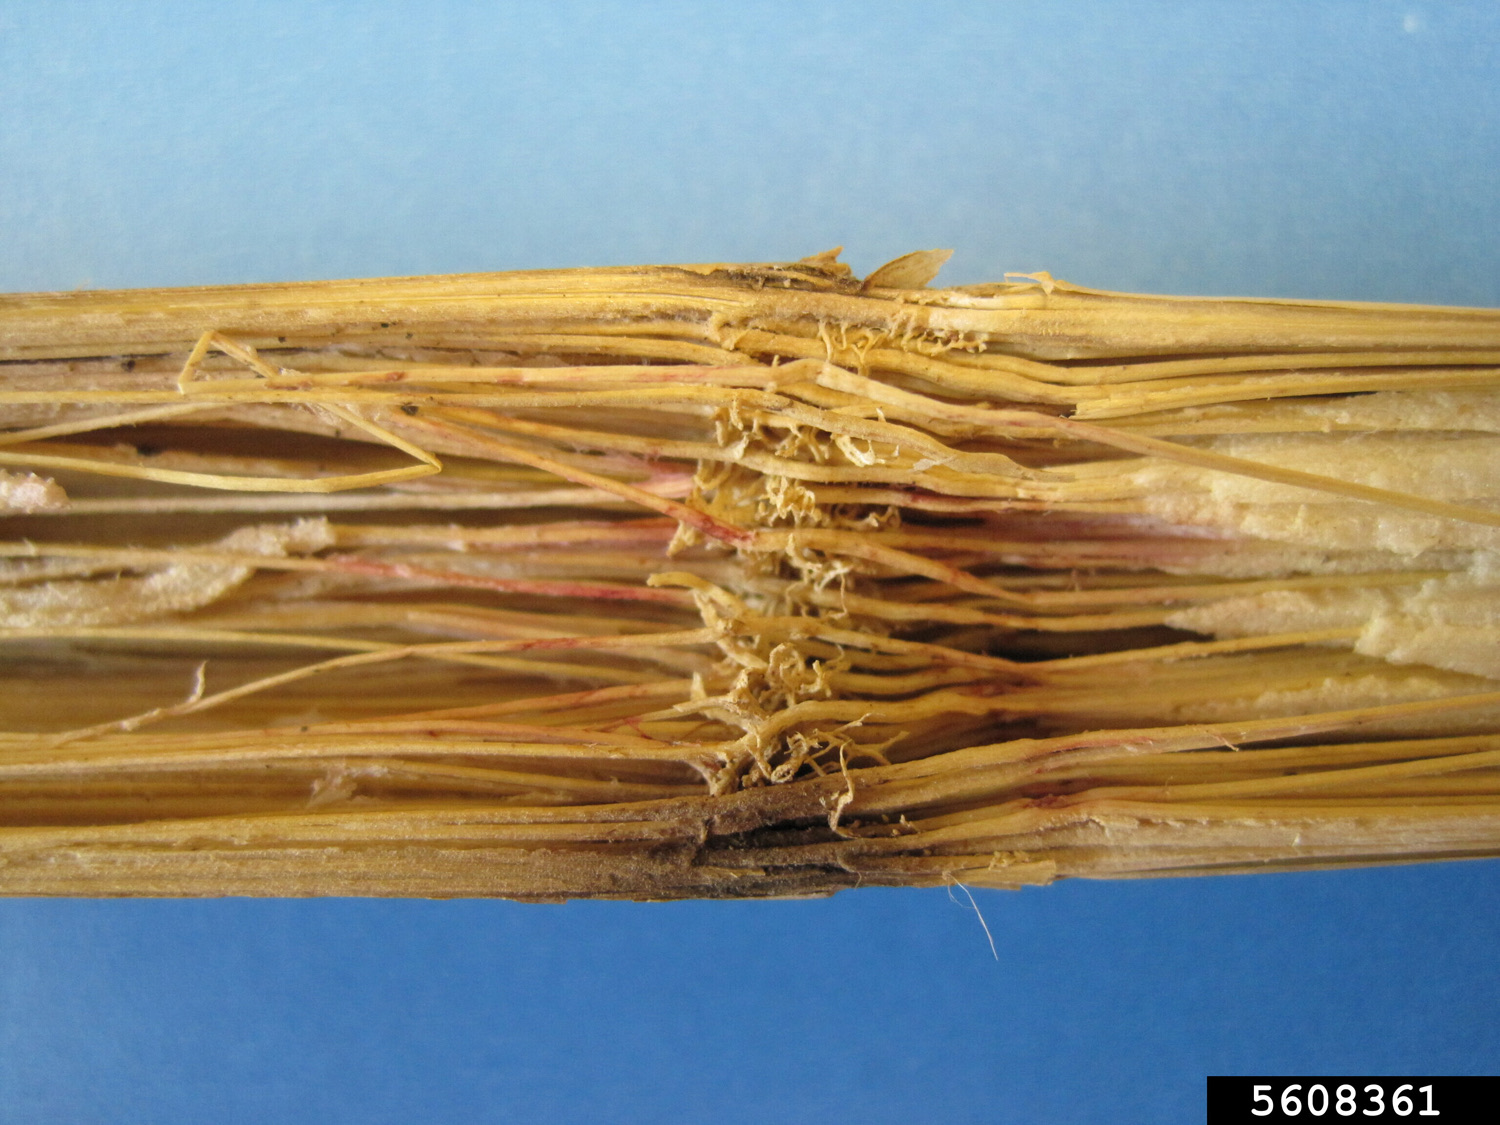 a closeup image of the inside of a stalk of corn showing reddish areas along the strands inside the stalk